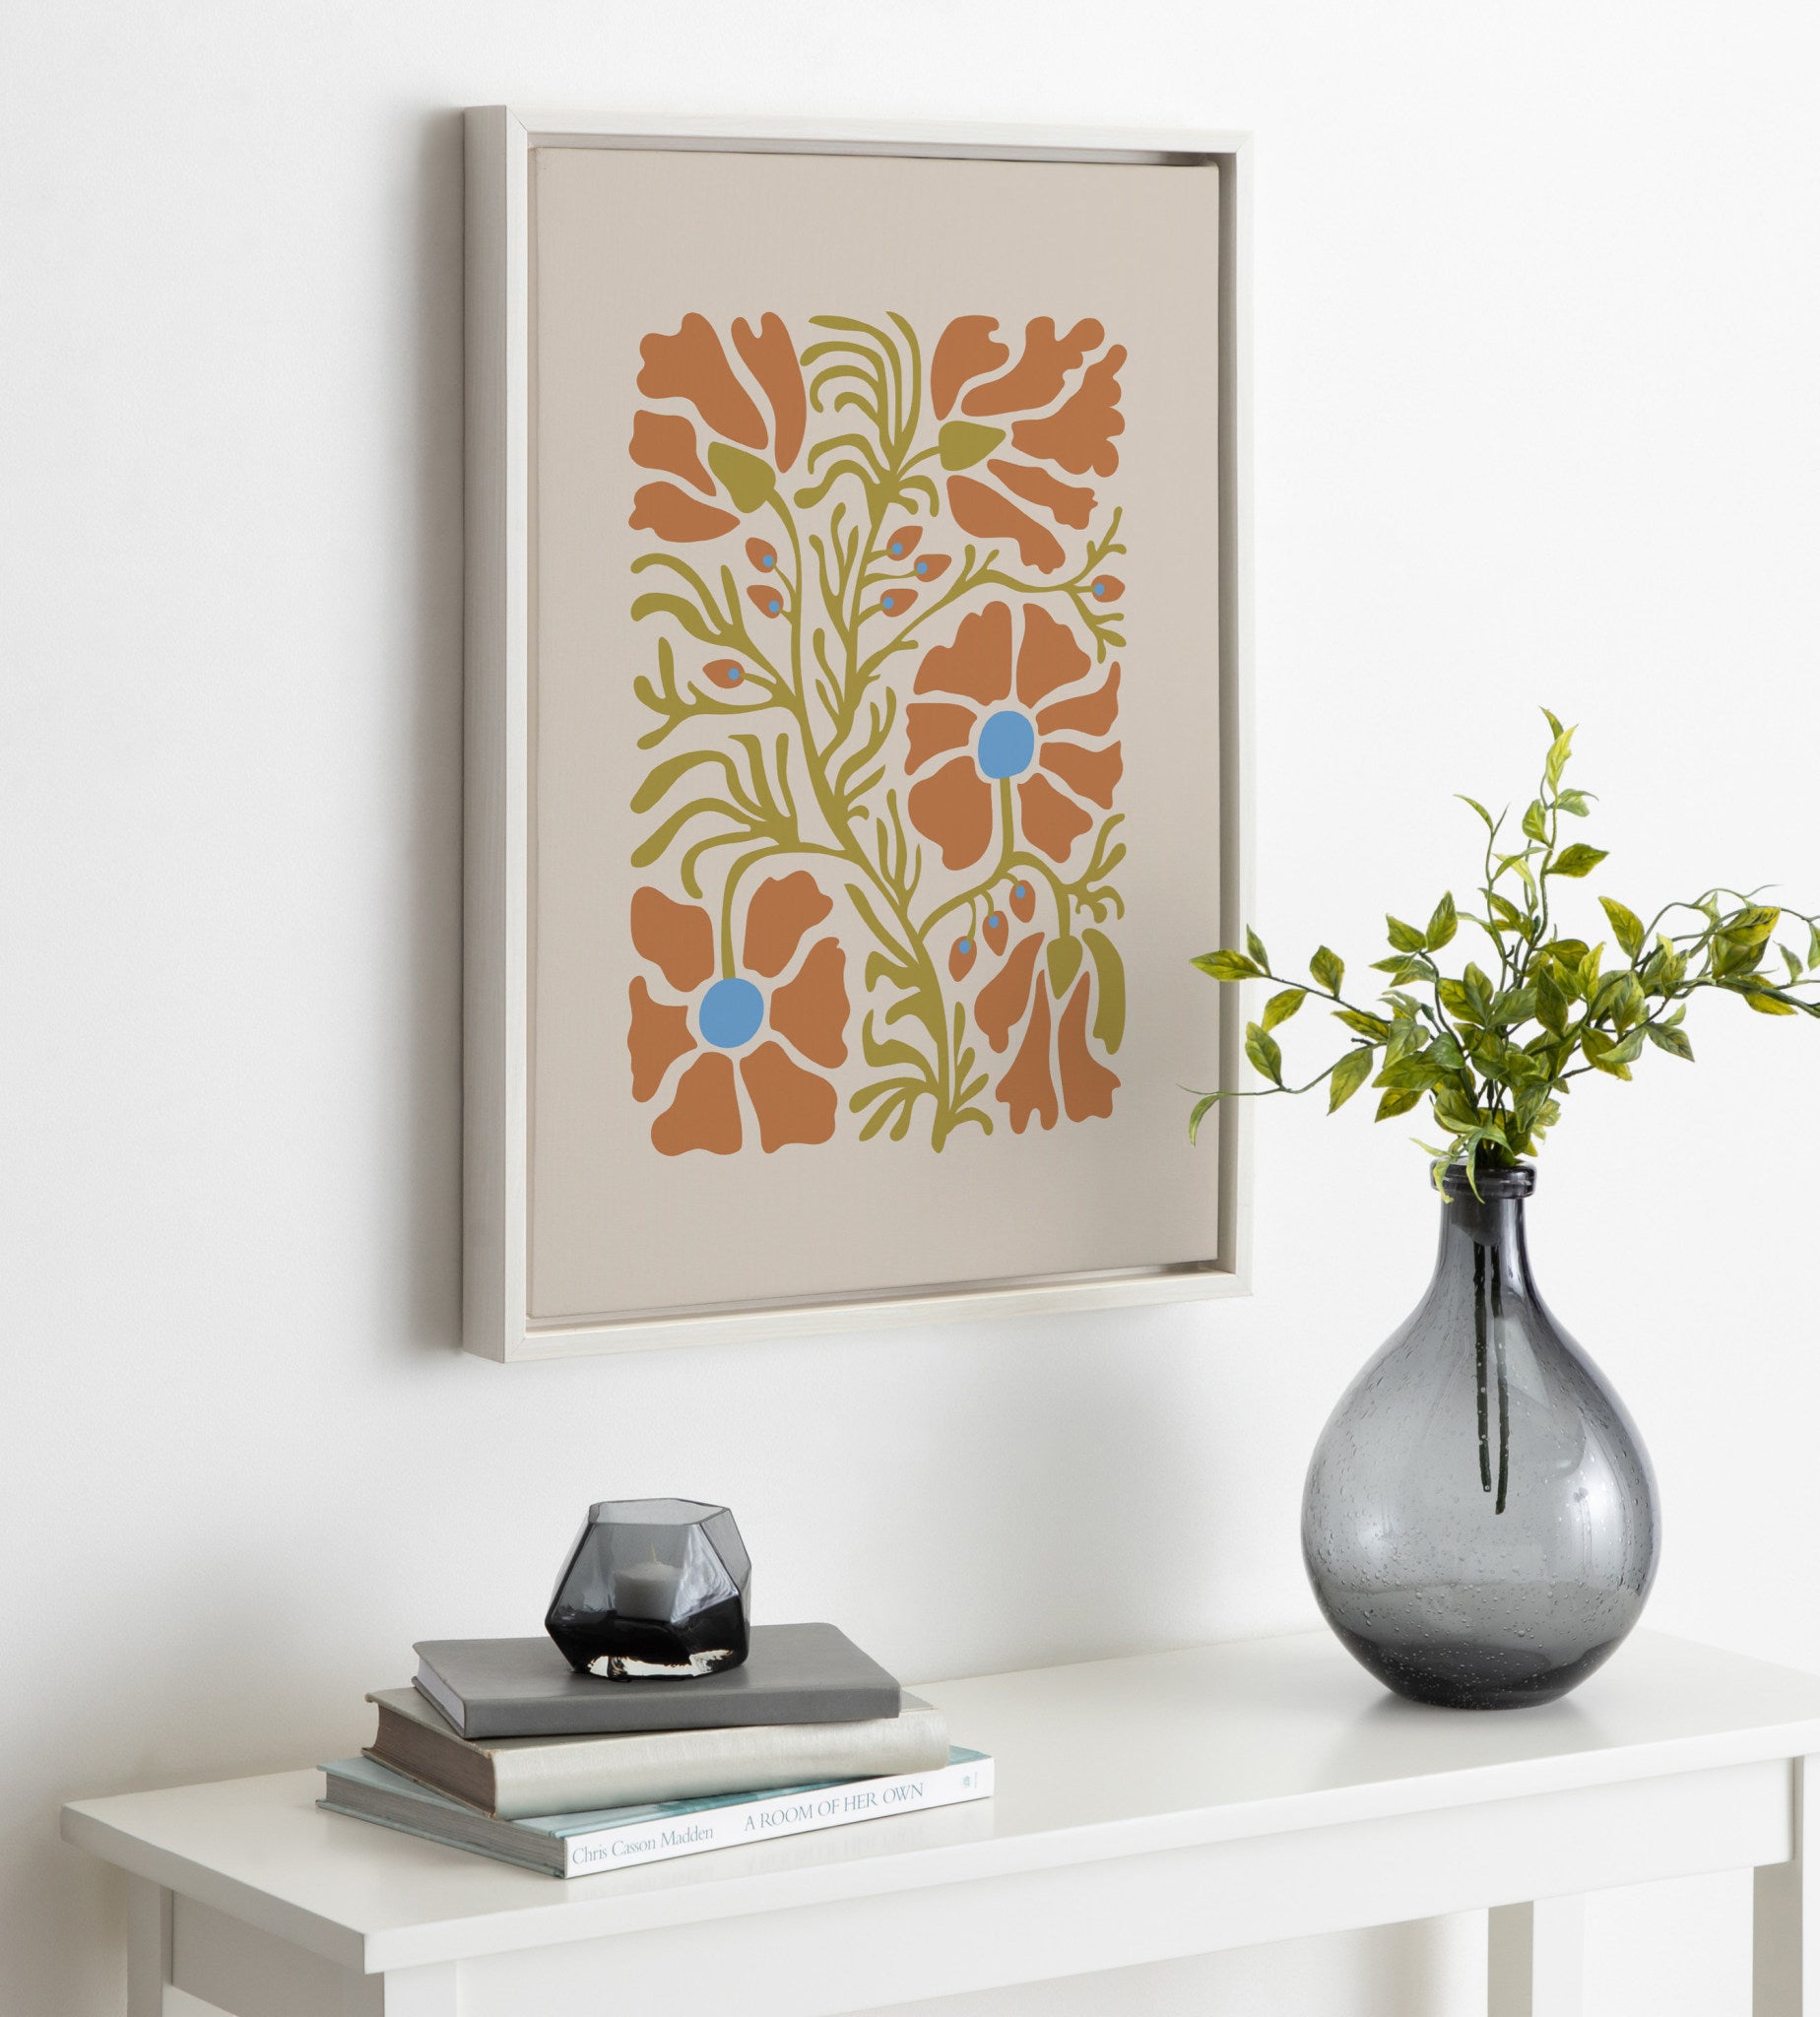 Sylvie Colorful Abstract Retro Floral Orange Framed Canvas by The Creative Bunch Studio